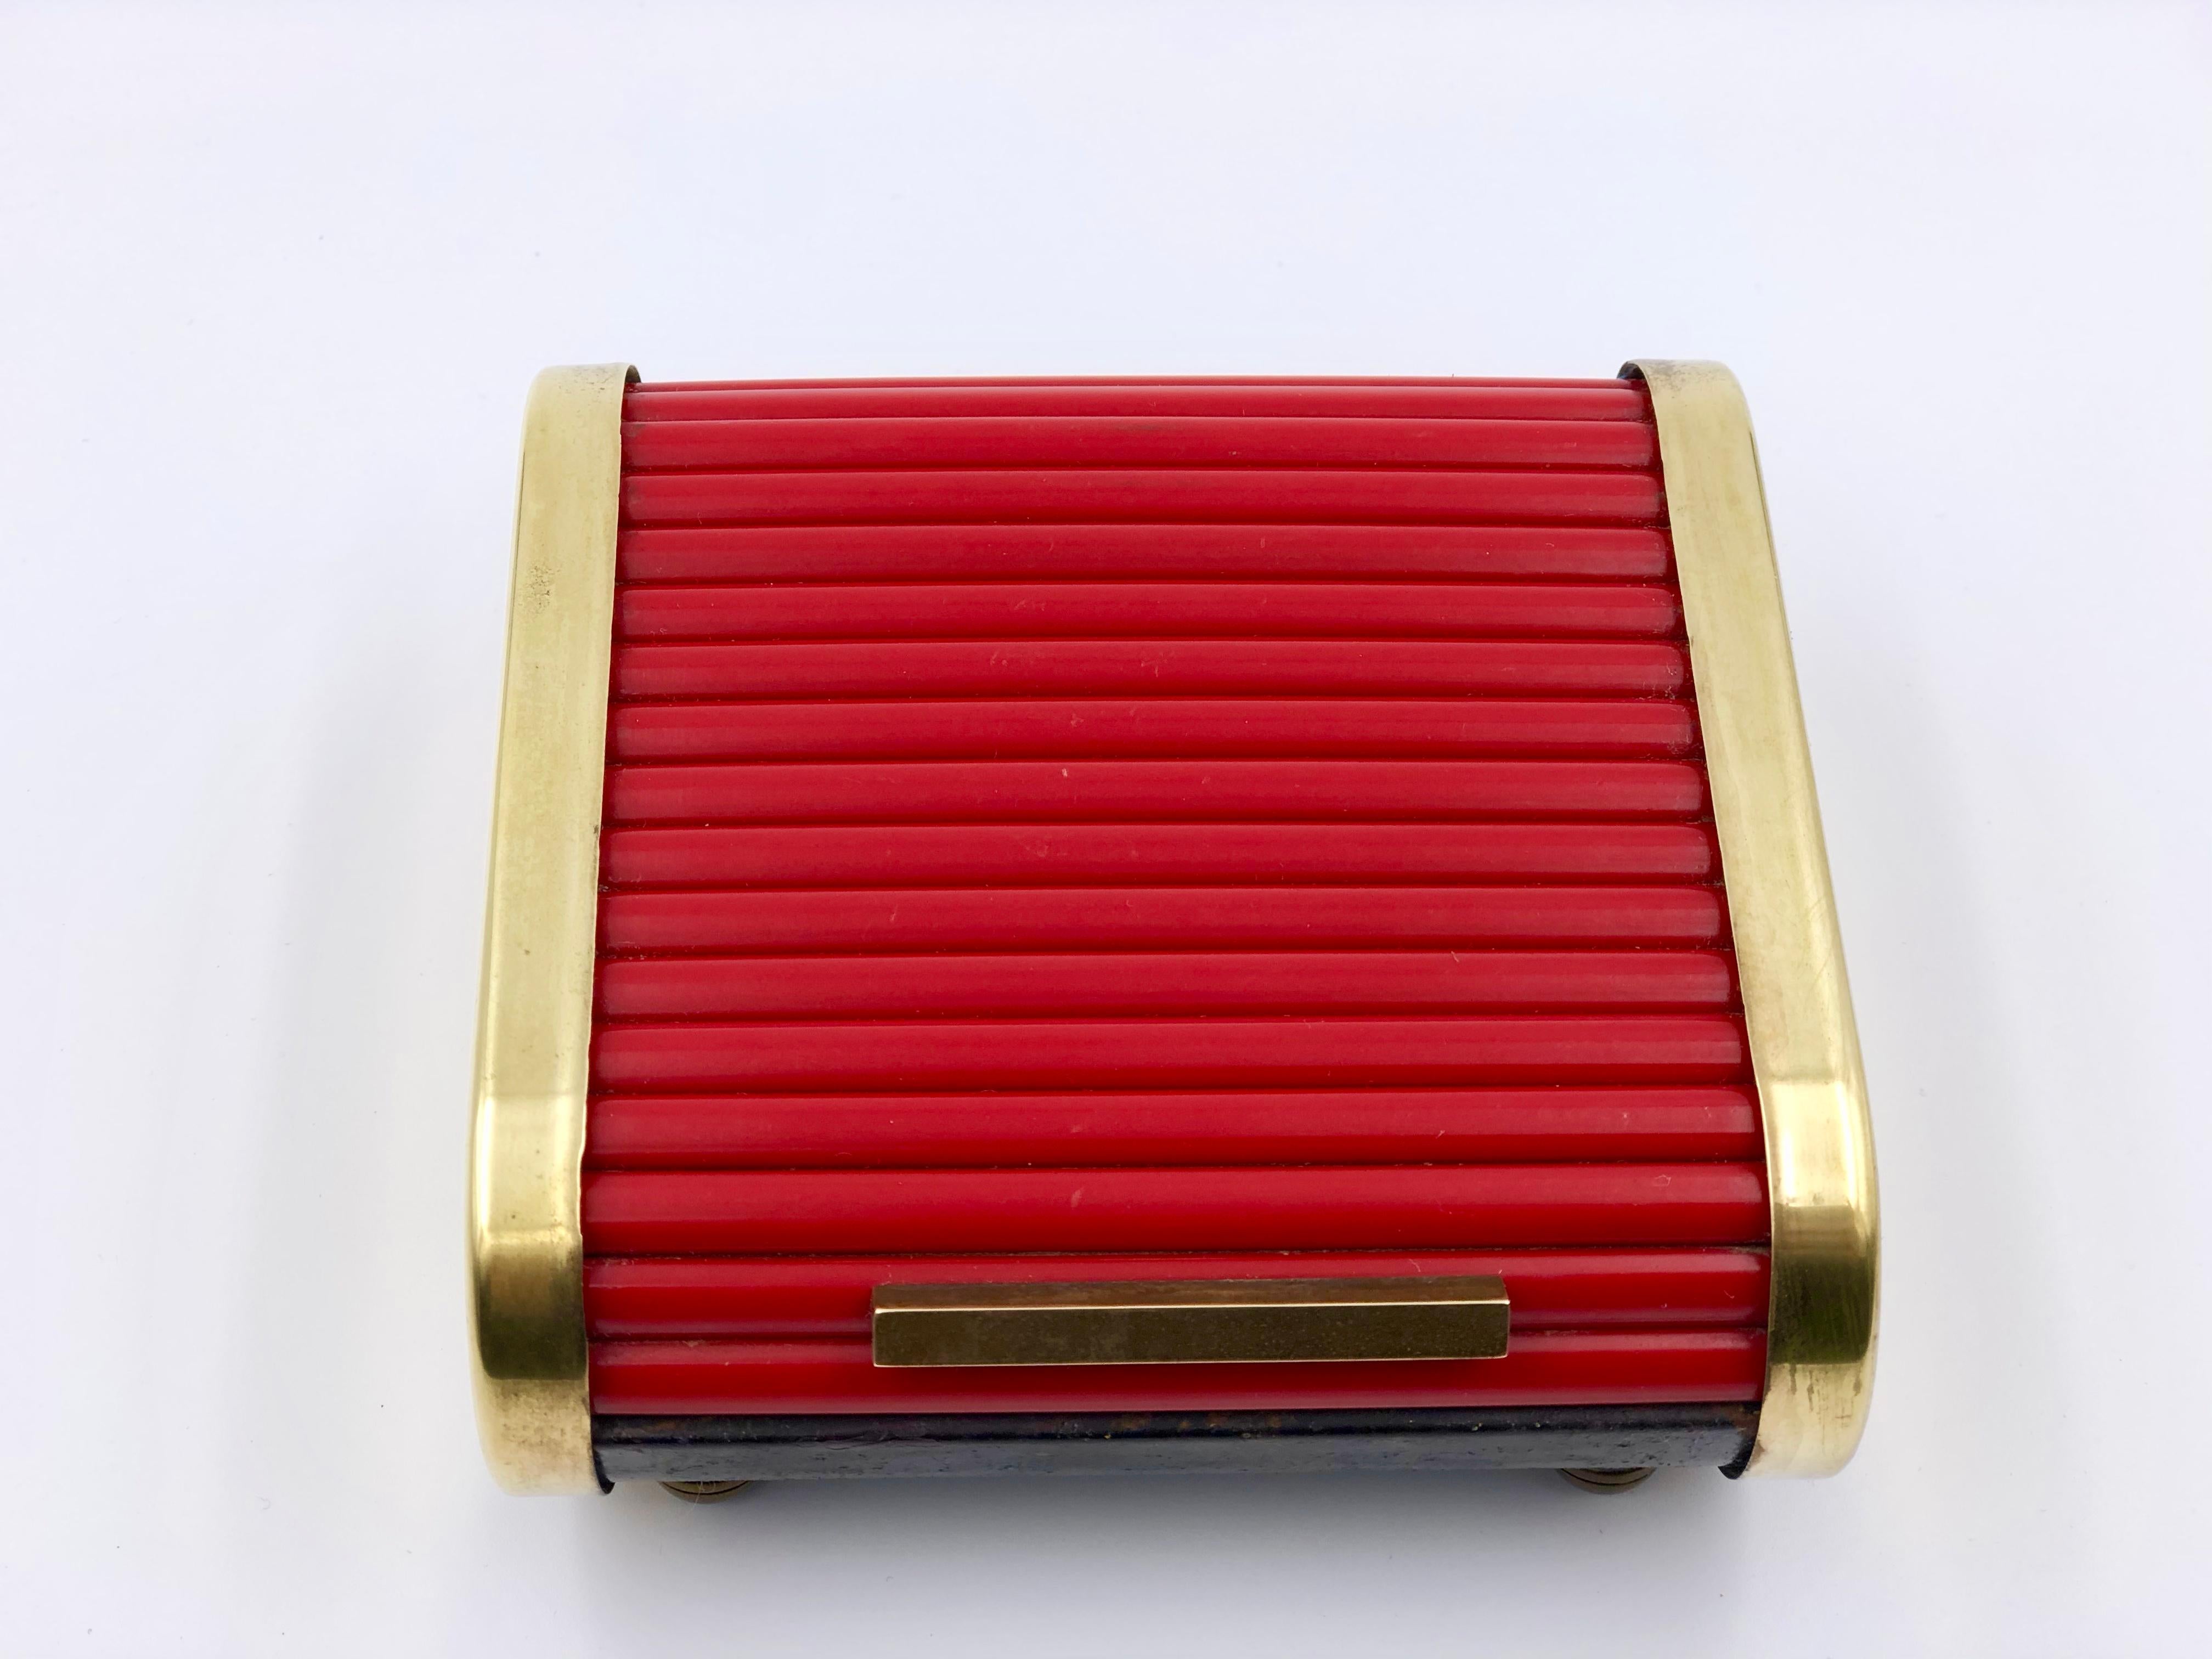 American Art Deco Tambour Top Desk Caddy of Red Bakelite and Brass by Park Sherman